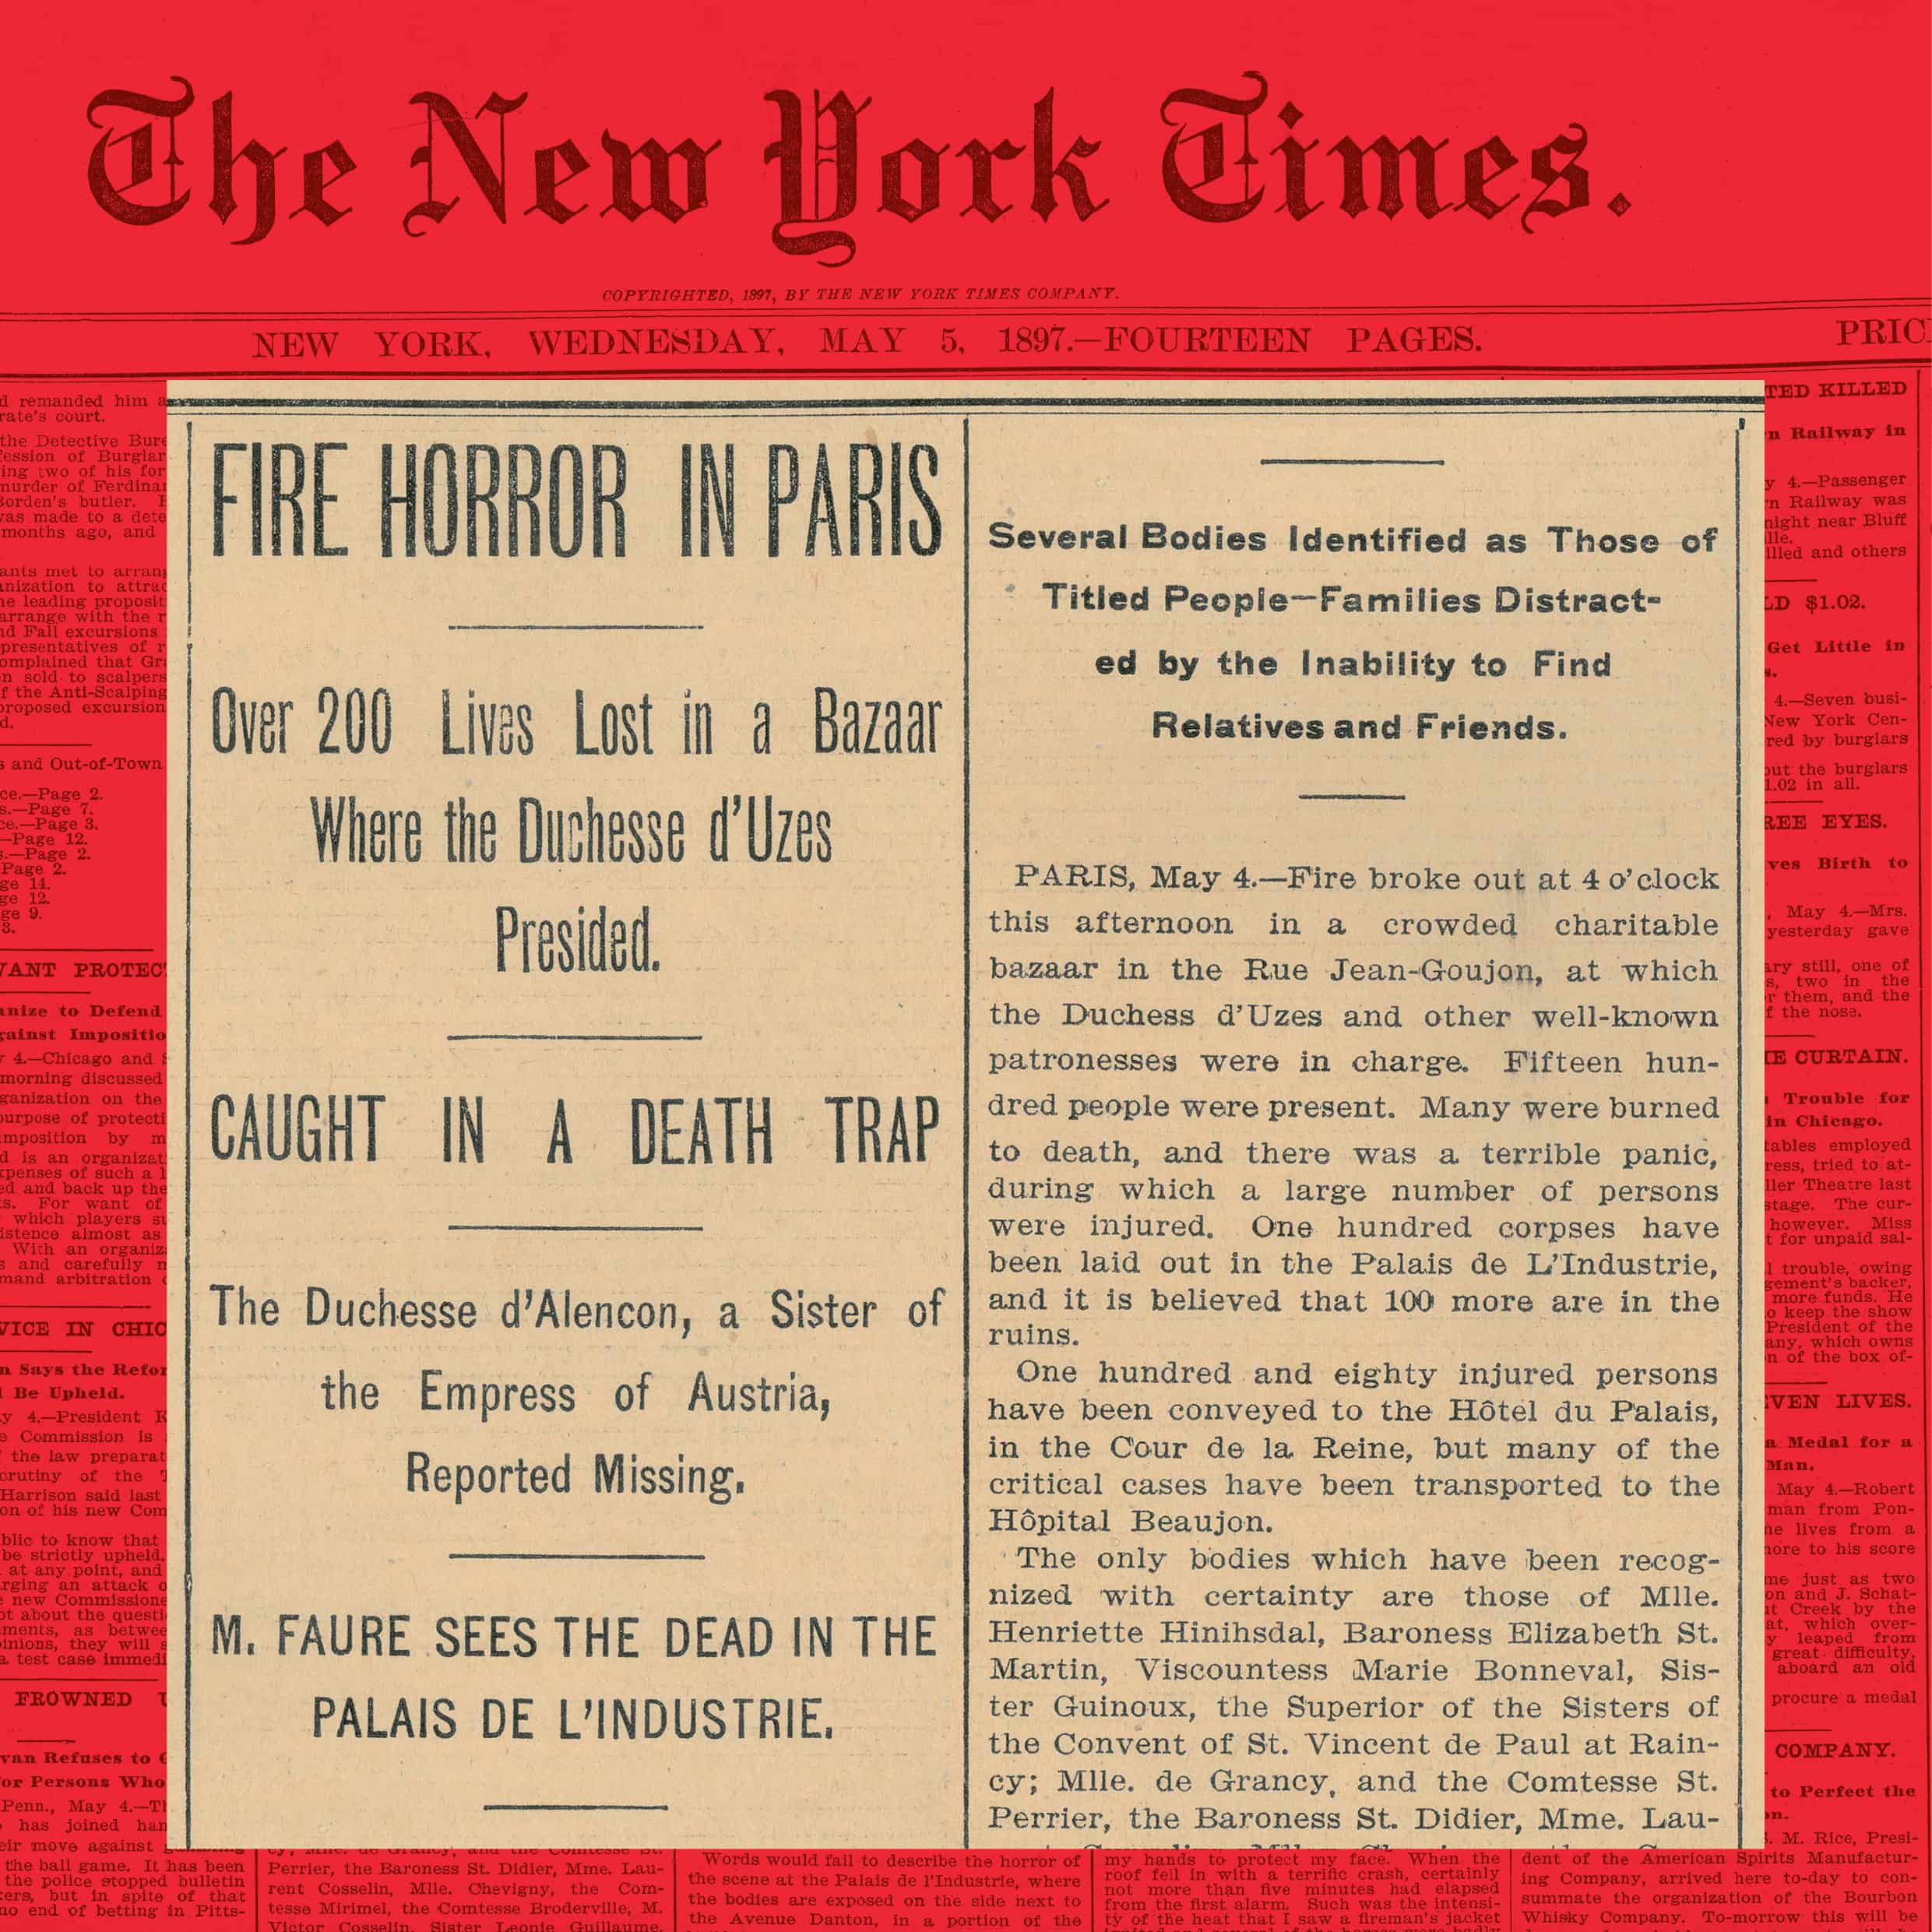  <strong>Fire horror in Paris: Over 200 lives lost </strong>…’, published in The New York Times, 5 May 1897, newspaper cutting, 56.0 × 45.0 cm. HFADM 3120, Henry Forman Atkinson Dental Museum, University of Melbourne.
<br><br>
        The modern era of forensic odontology began with the identification of the victims of the fire in the Bazaar de la Charité, which occurred on 4 May 1897 in Rue Jean-Goujon, Paris.